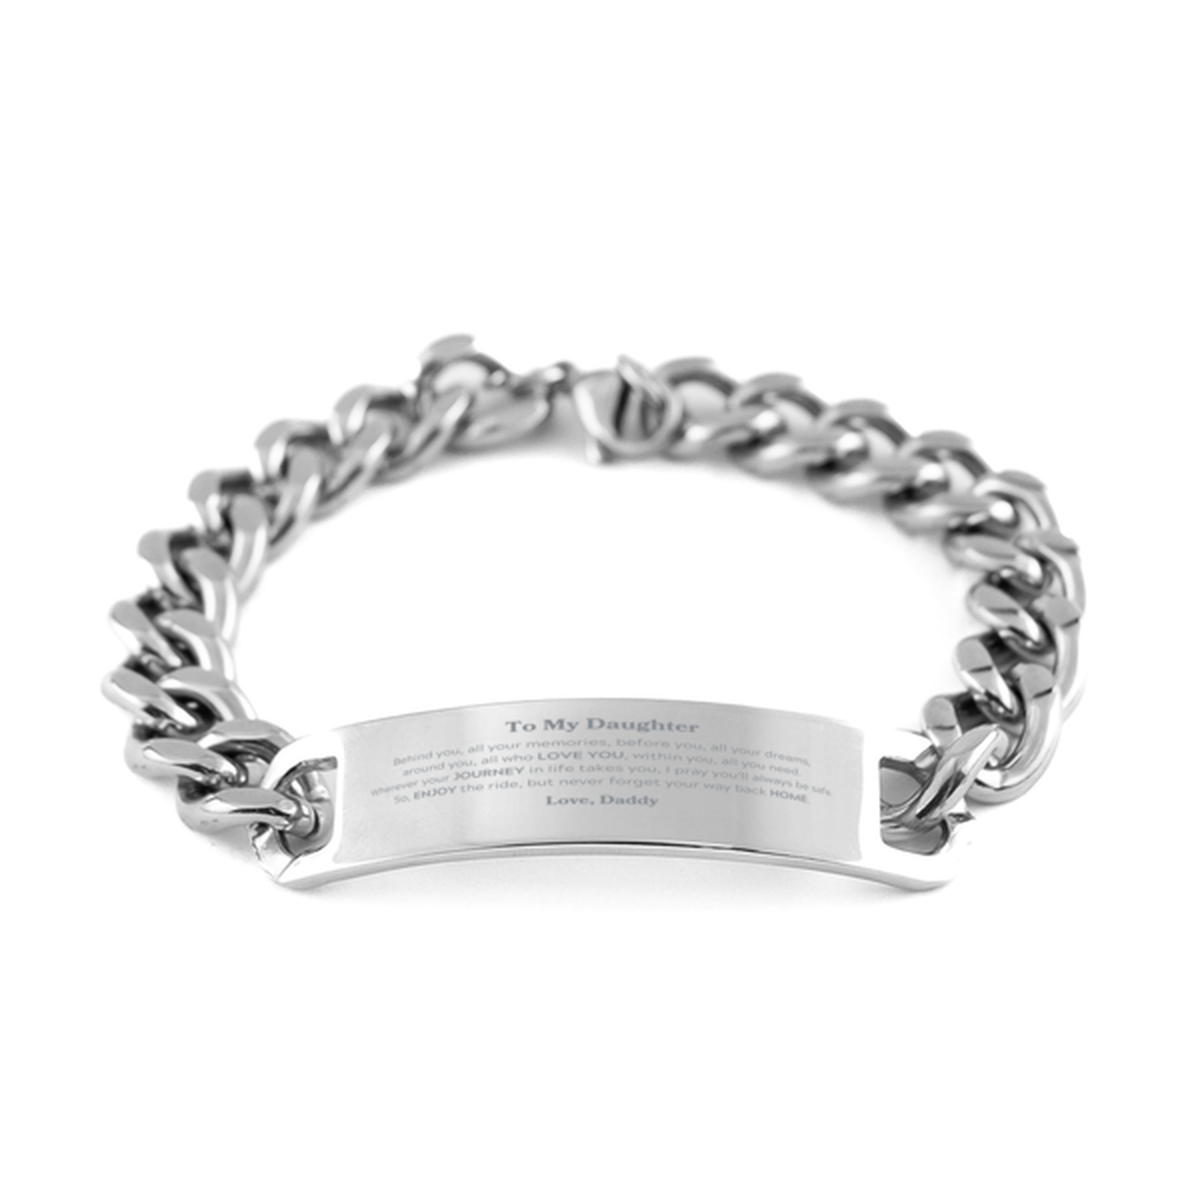 To My Daughter Graduation Gifts from Daddy, Daughter Cuban Chain Stainless Steel Bracelet Christmas Birthday Gifts for Daughter Behind you, all your memories, before you, all your dreams. Love, Daddy